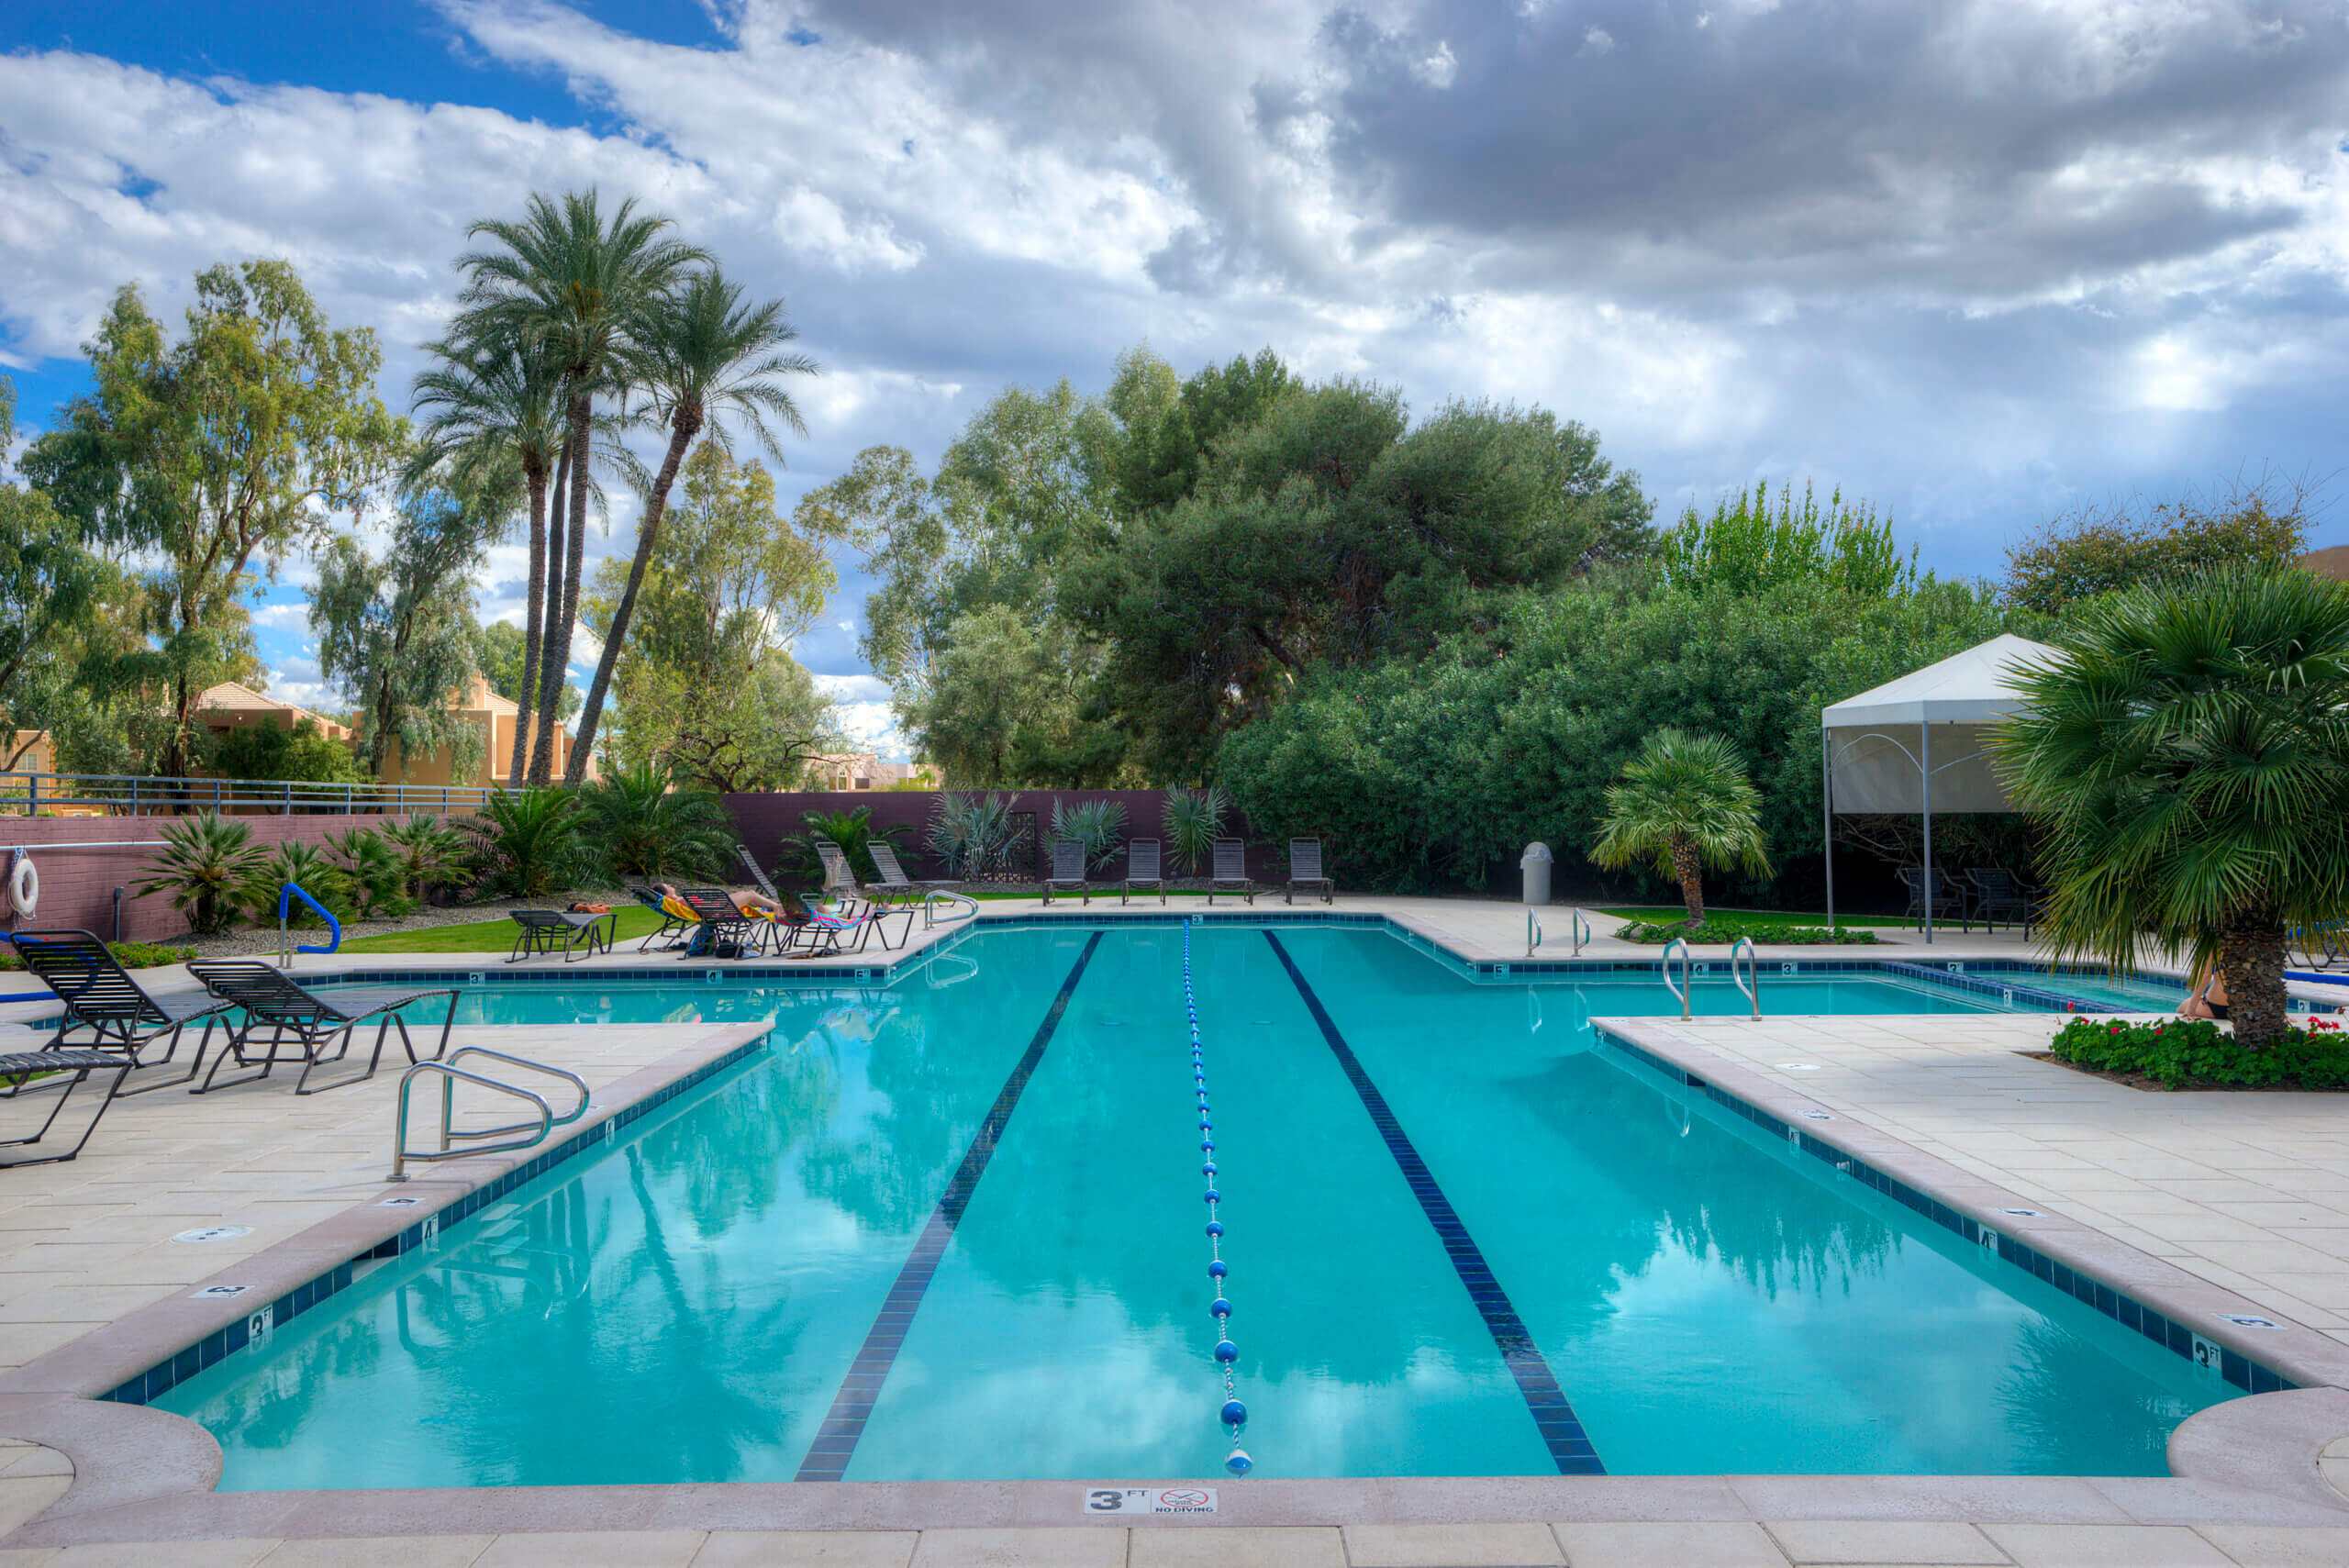 Gainey Ranch Pool and Spa